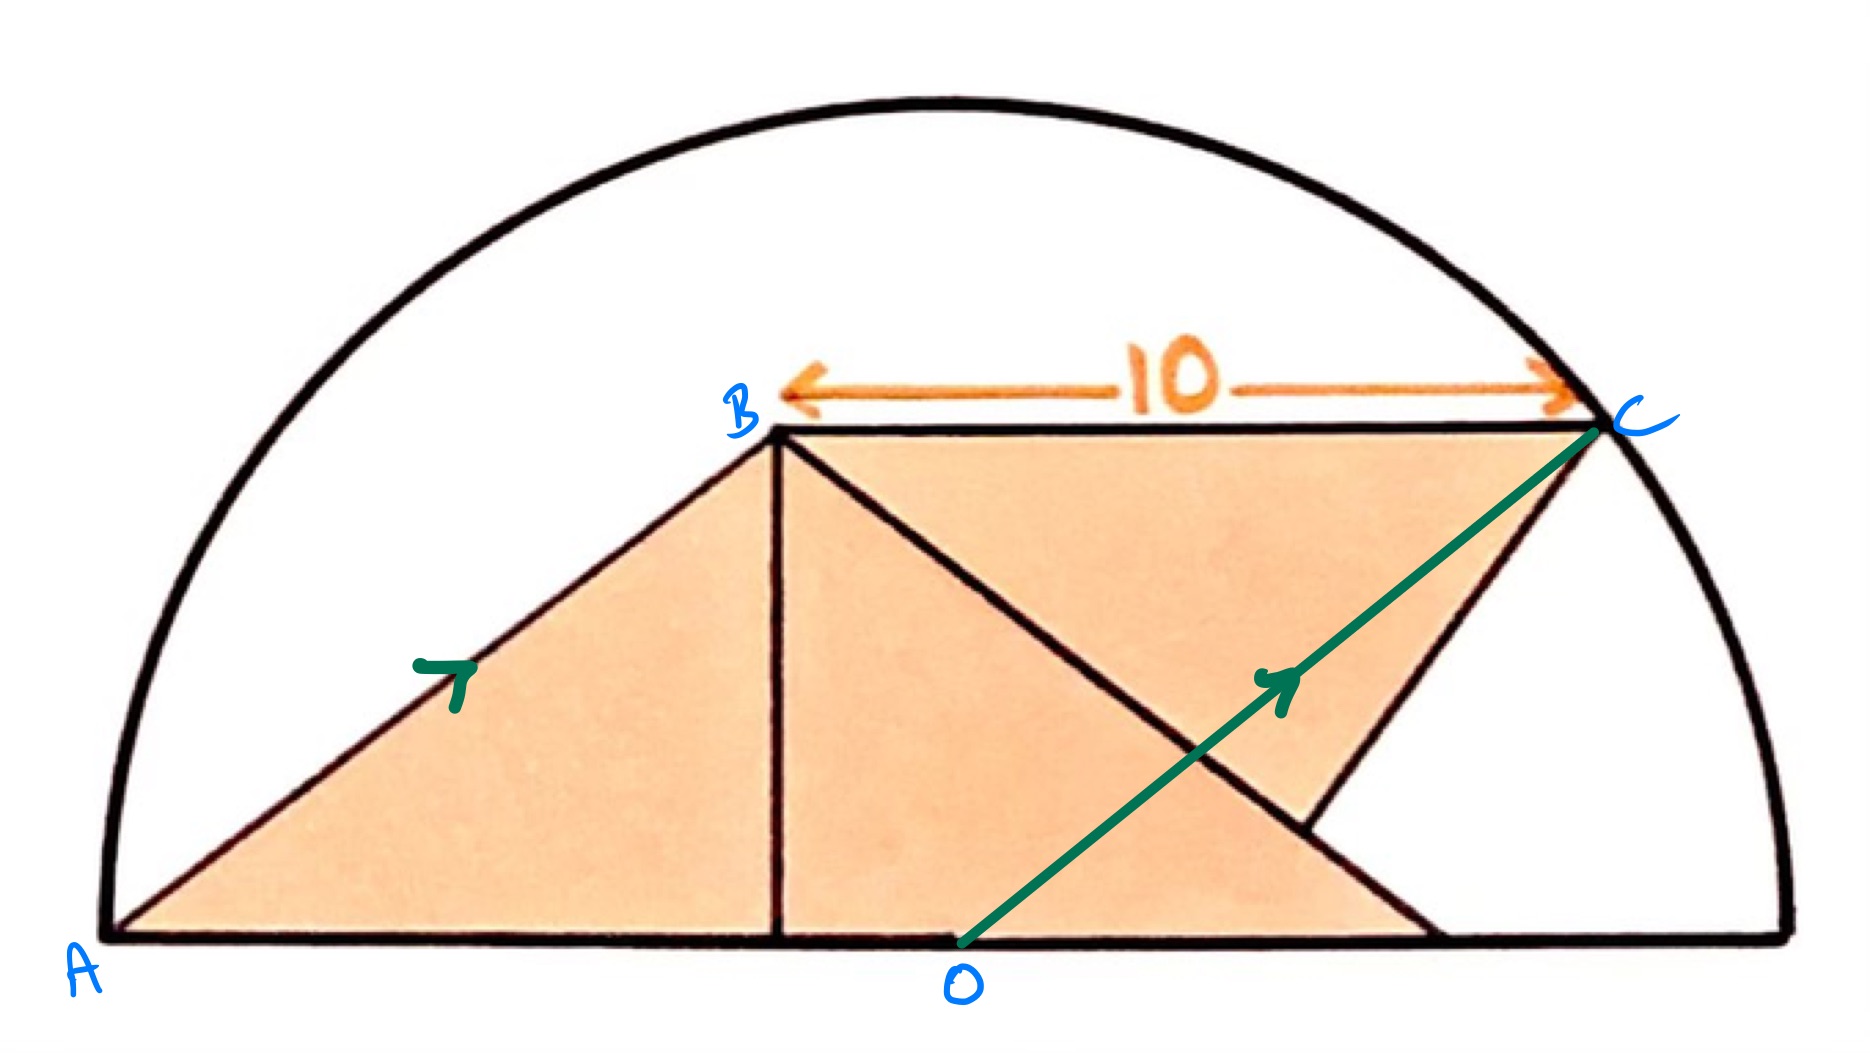 Three congruent triangles in a semi-circle labelled